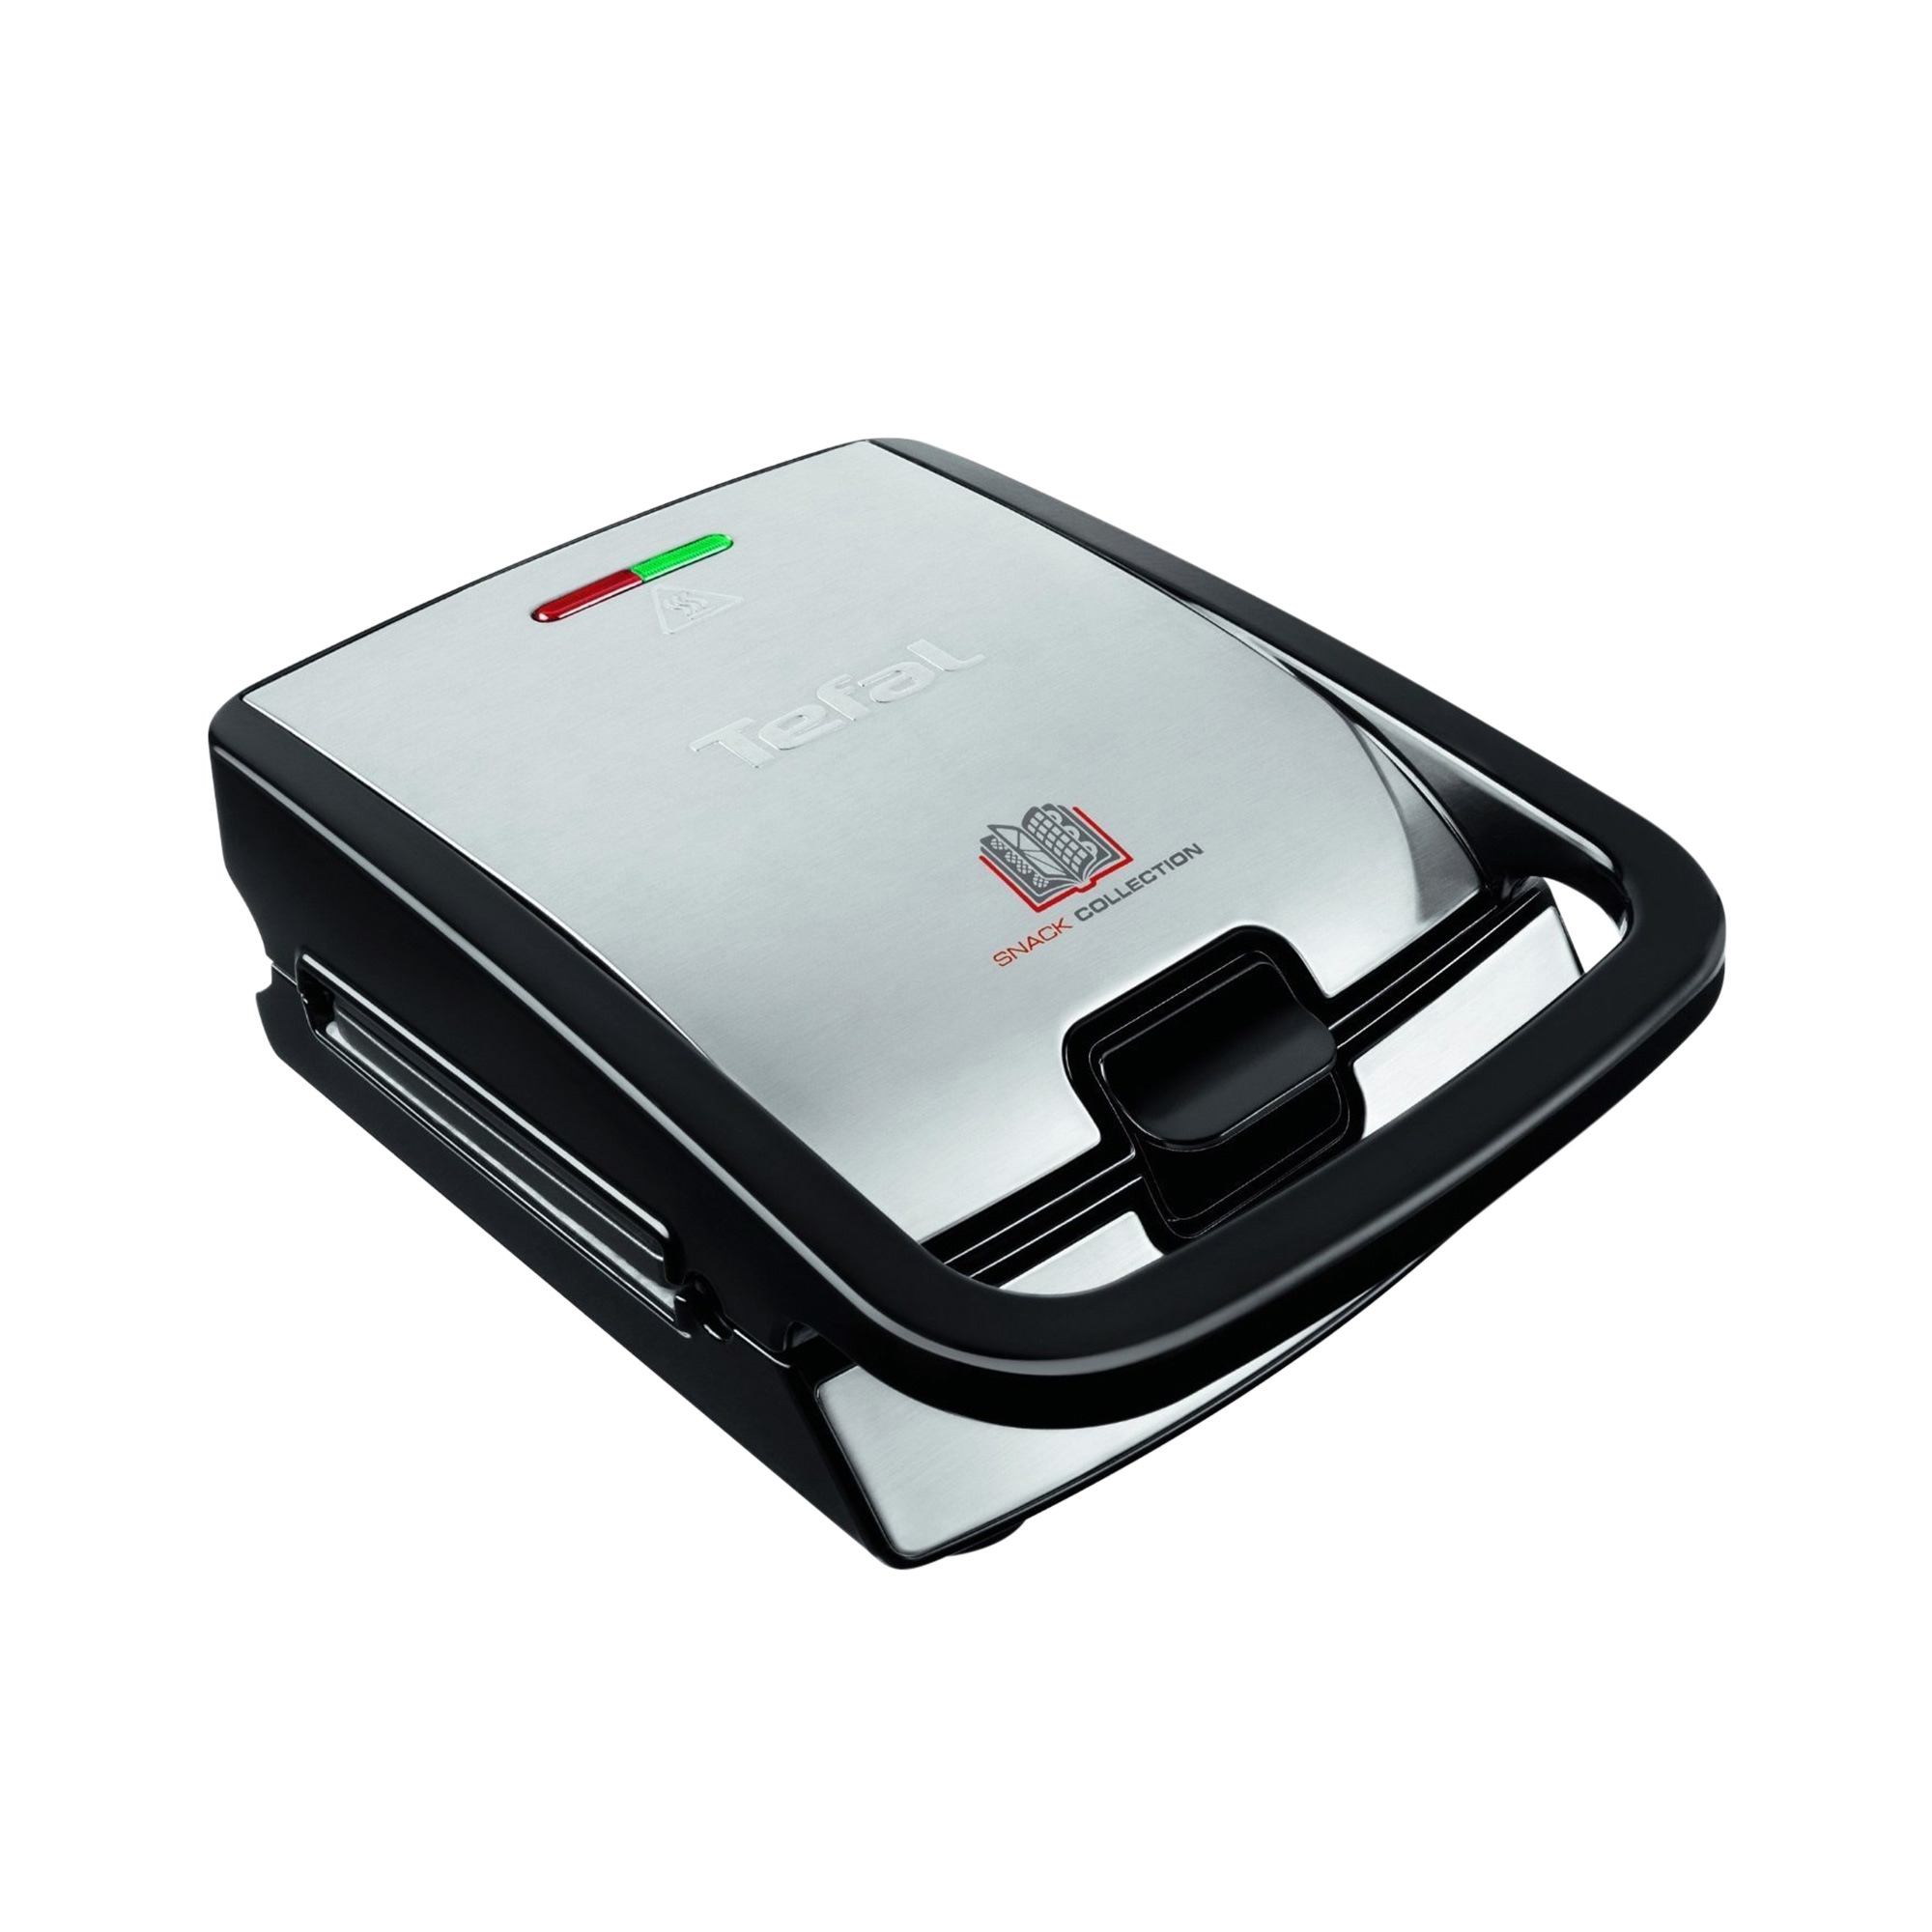 Tefal Snack Collection SW852D Multi-Function Sandwich Press Image 1